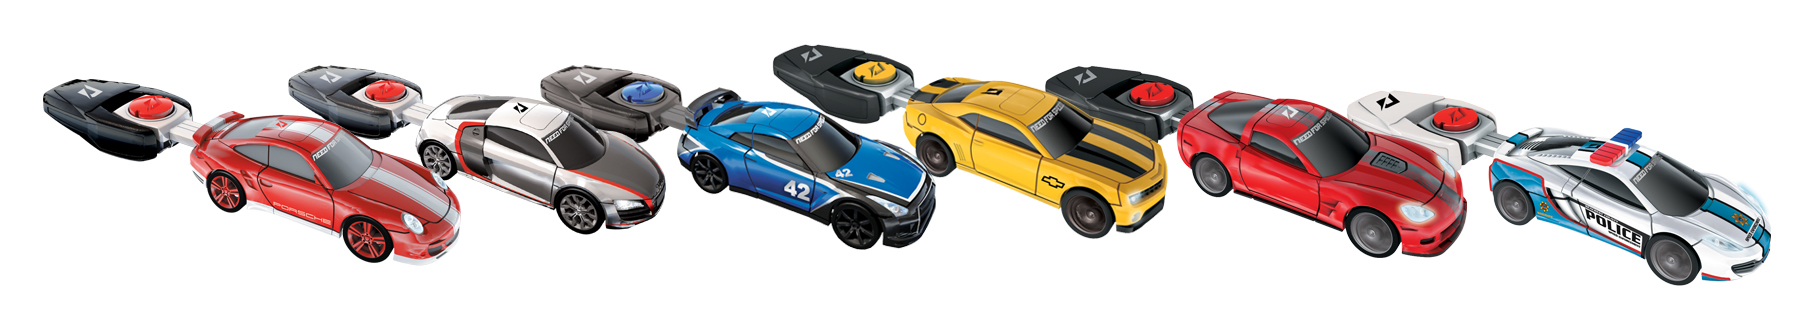 MEGA BLOKS - NEED FOR SPEED Collector's Series *Build & Race* 6-fach sortiert ( 16,5 x 11,5 x 4cm ) ( 0,114KG )